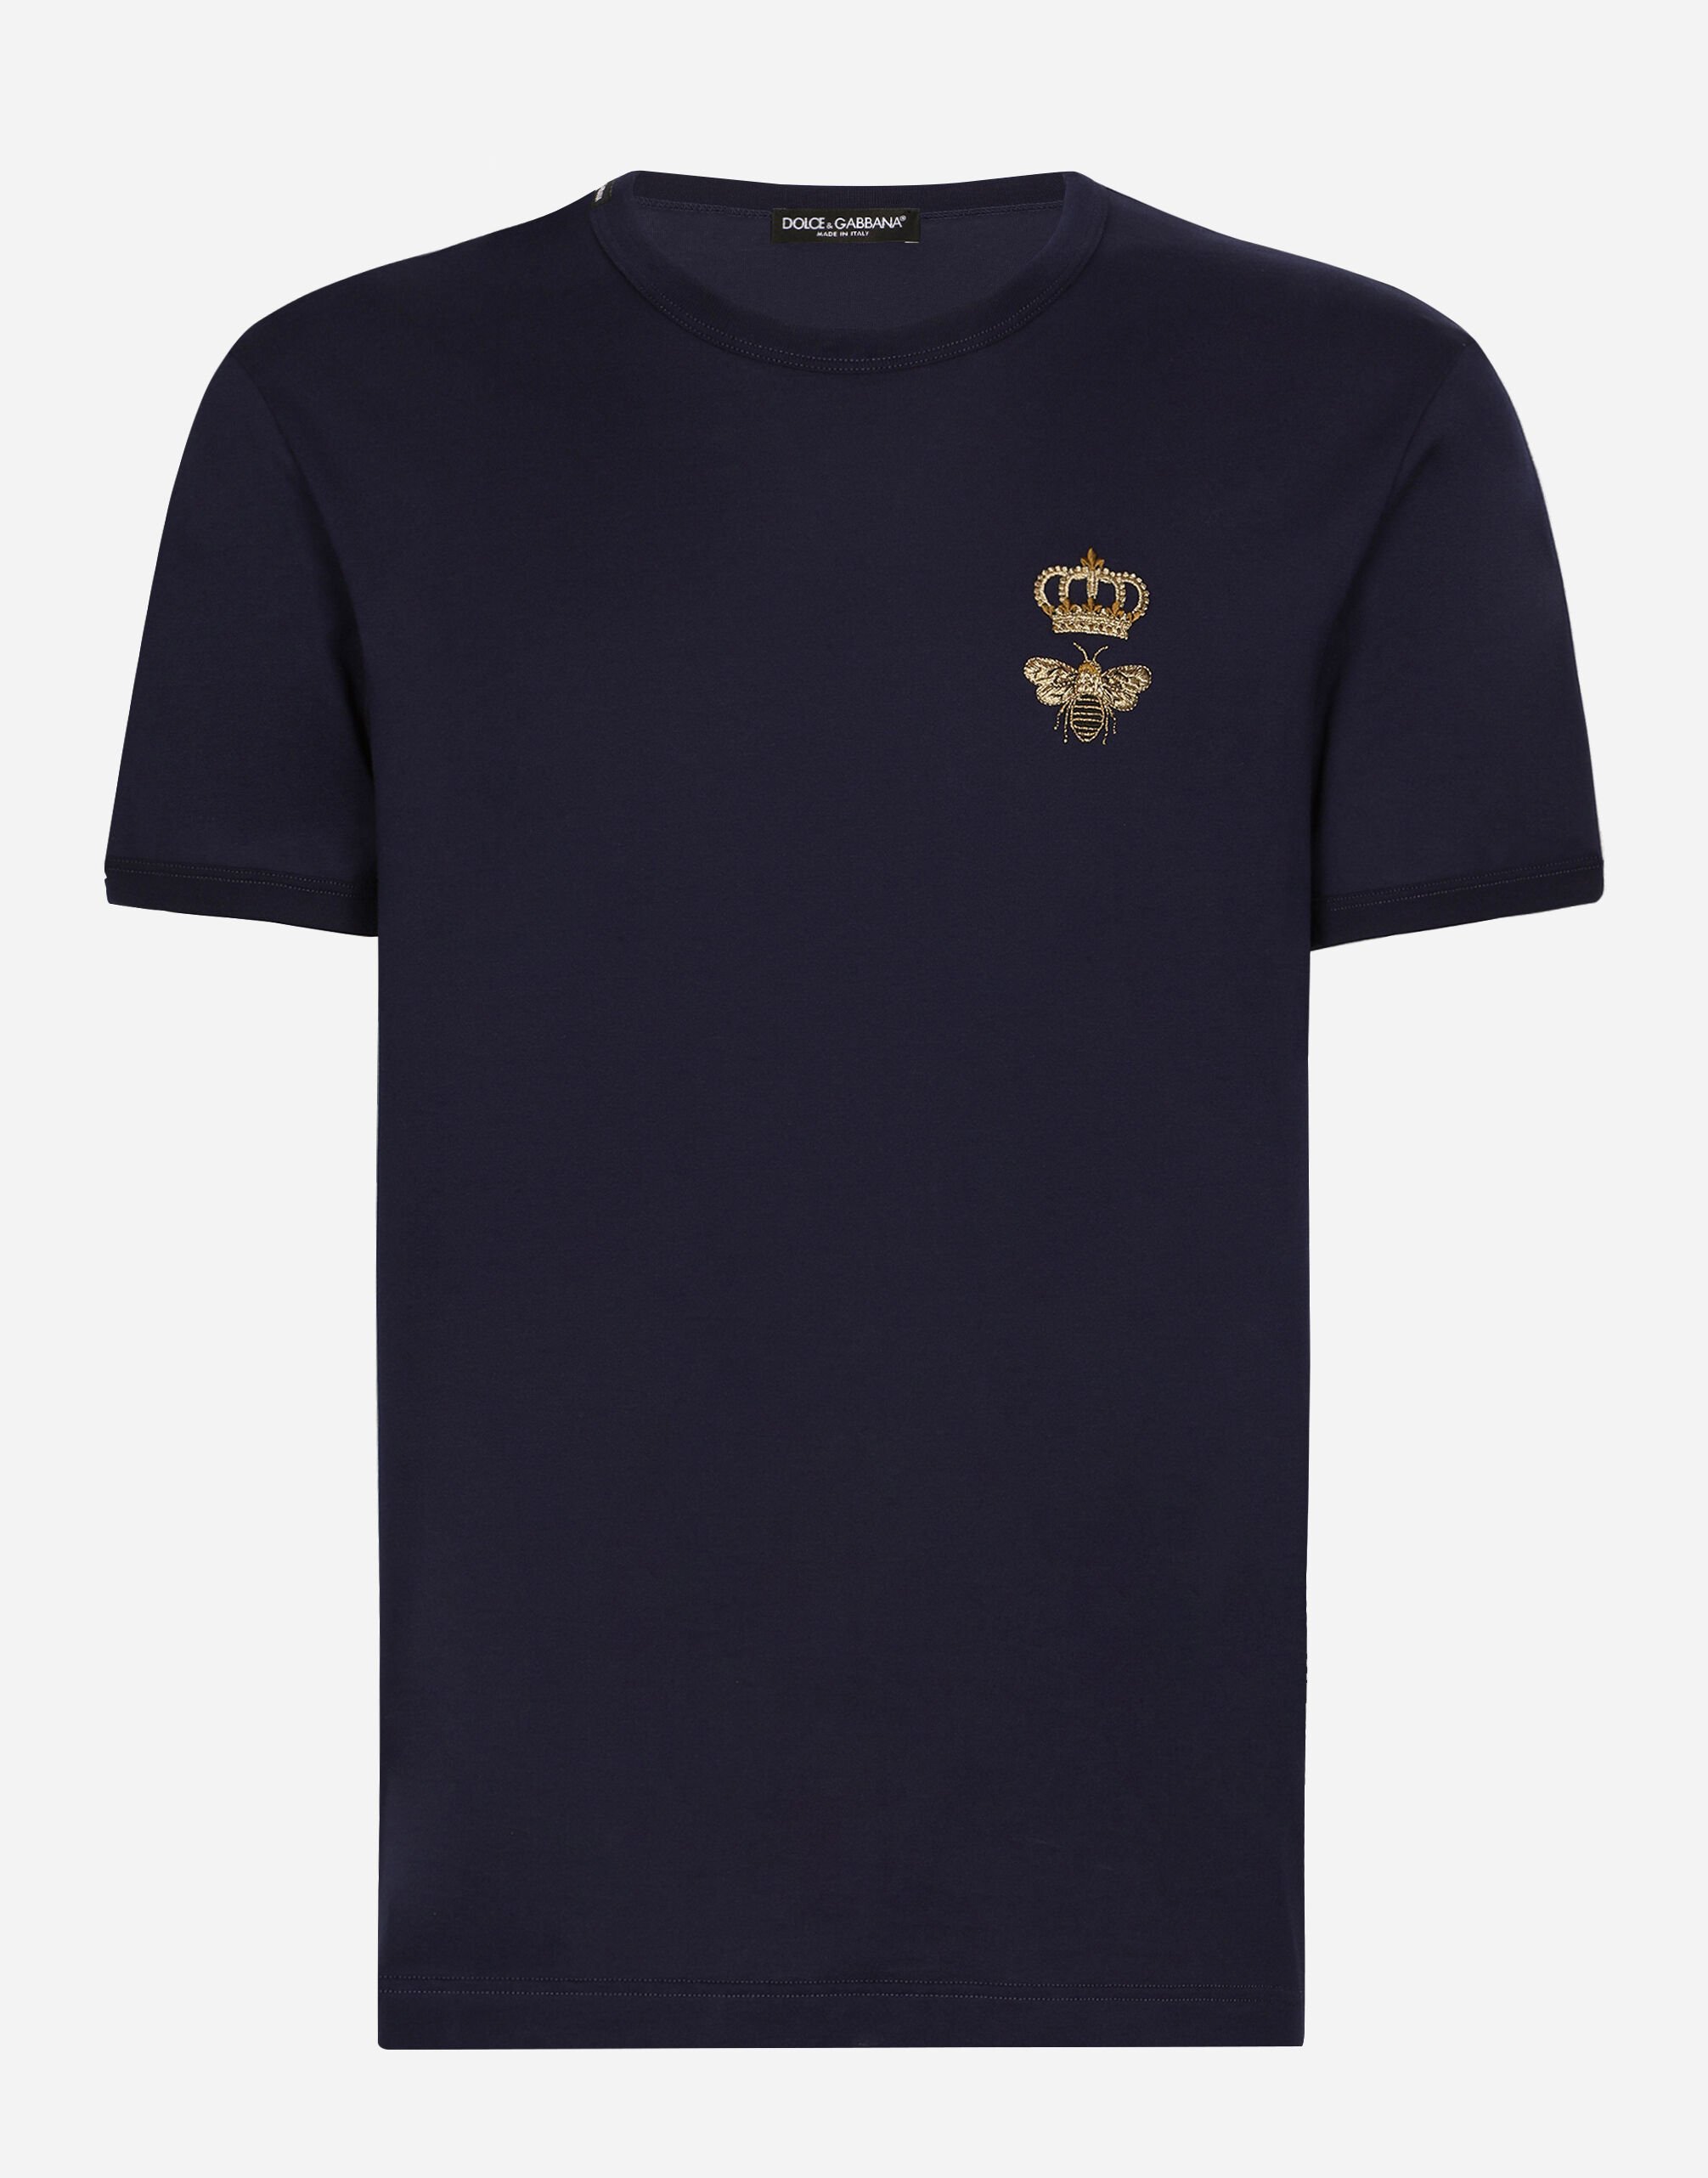 Dolce&Gabbana Cotton T-shirt with embroidery Blue G8PL4TG7F2H